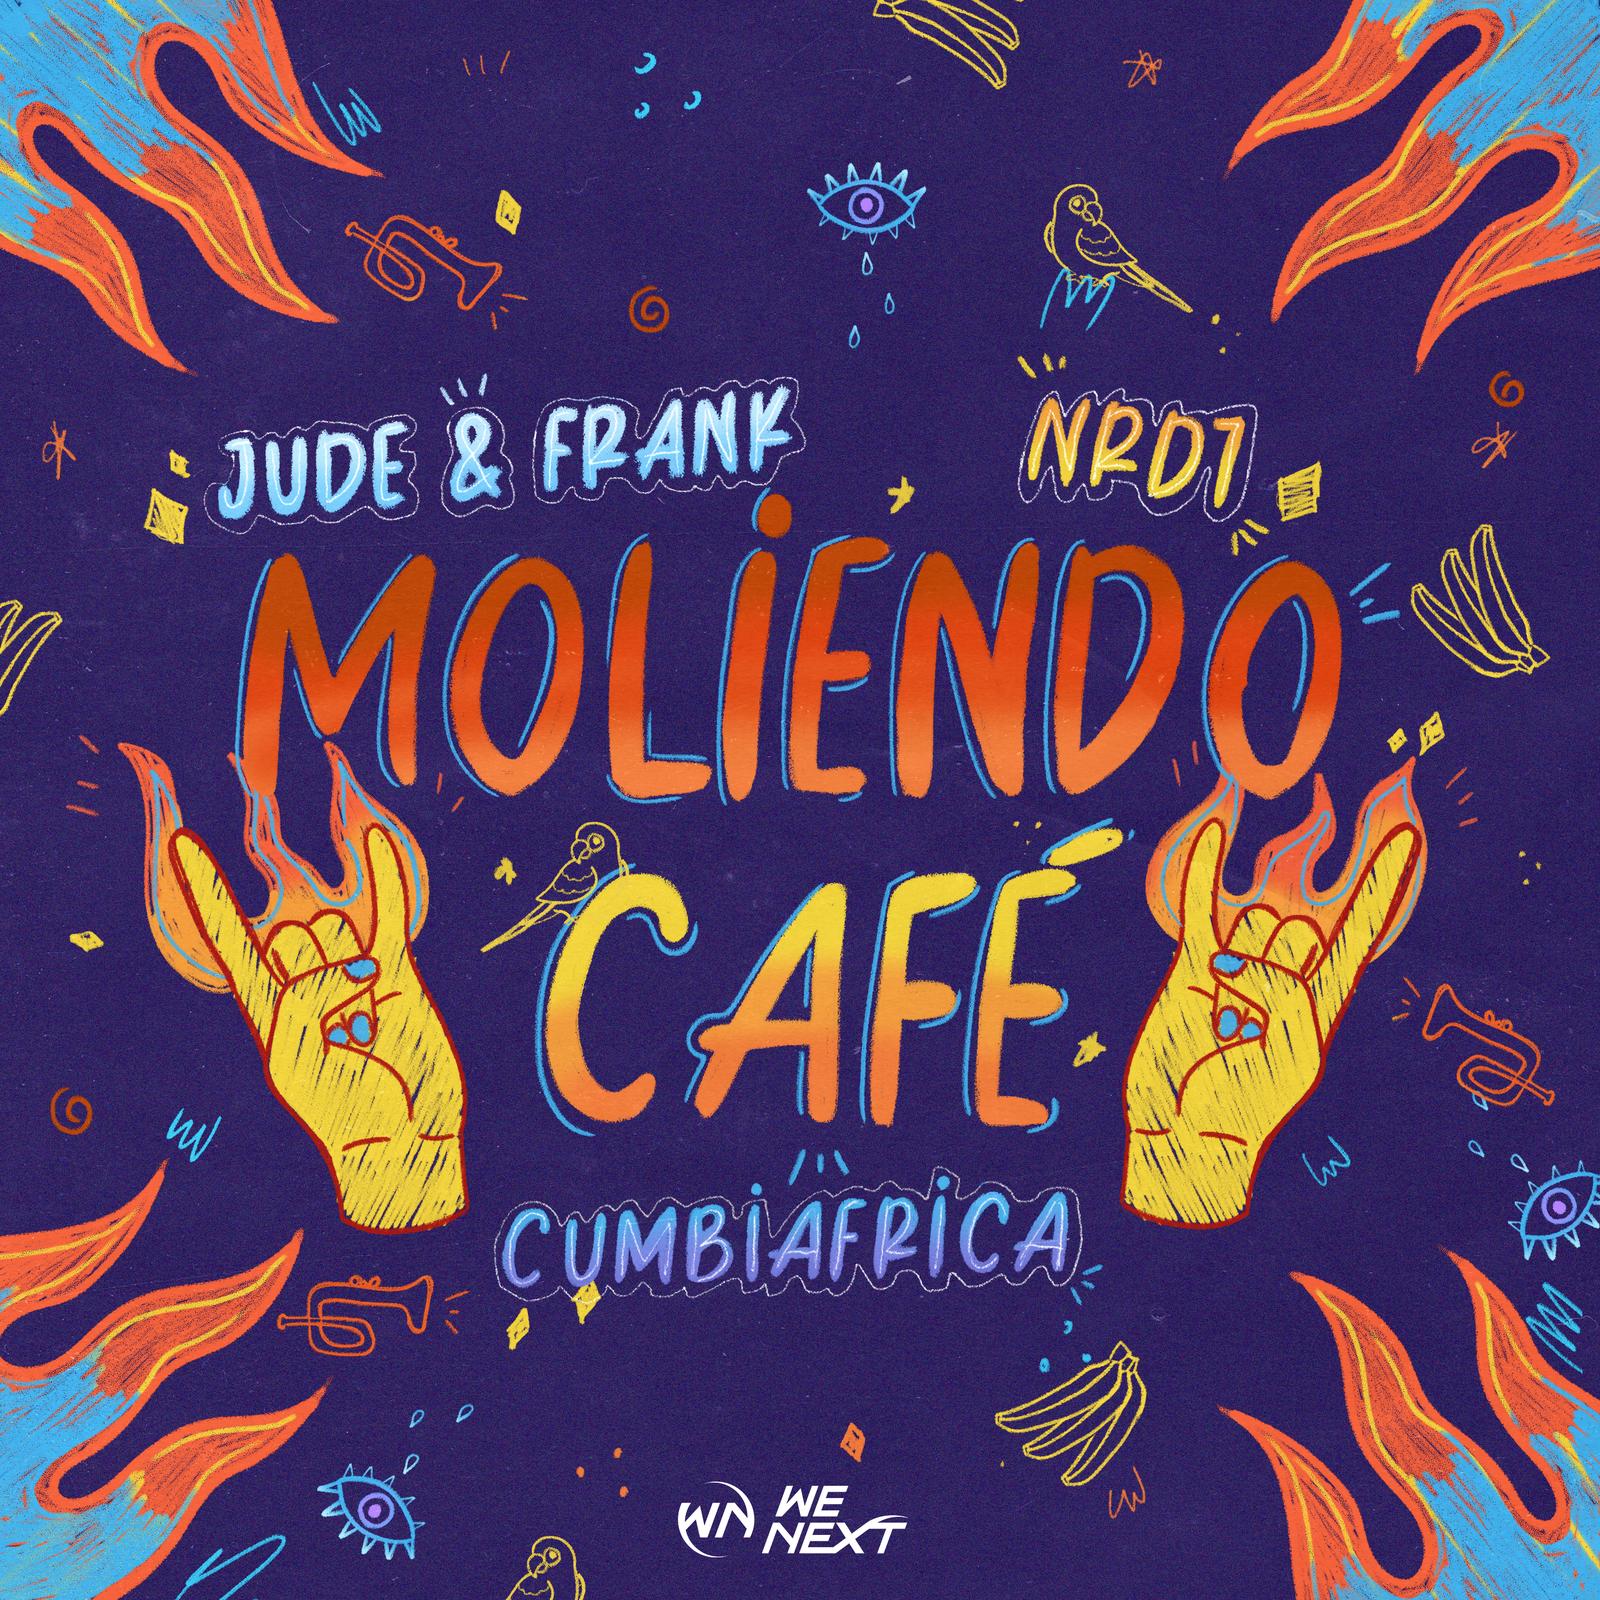 You are currently viewing SuperNova: Jude & Frank x NRD1 x Cumbiafrica – Moliendo Cafe (11.04)